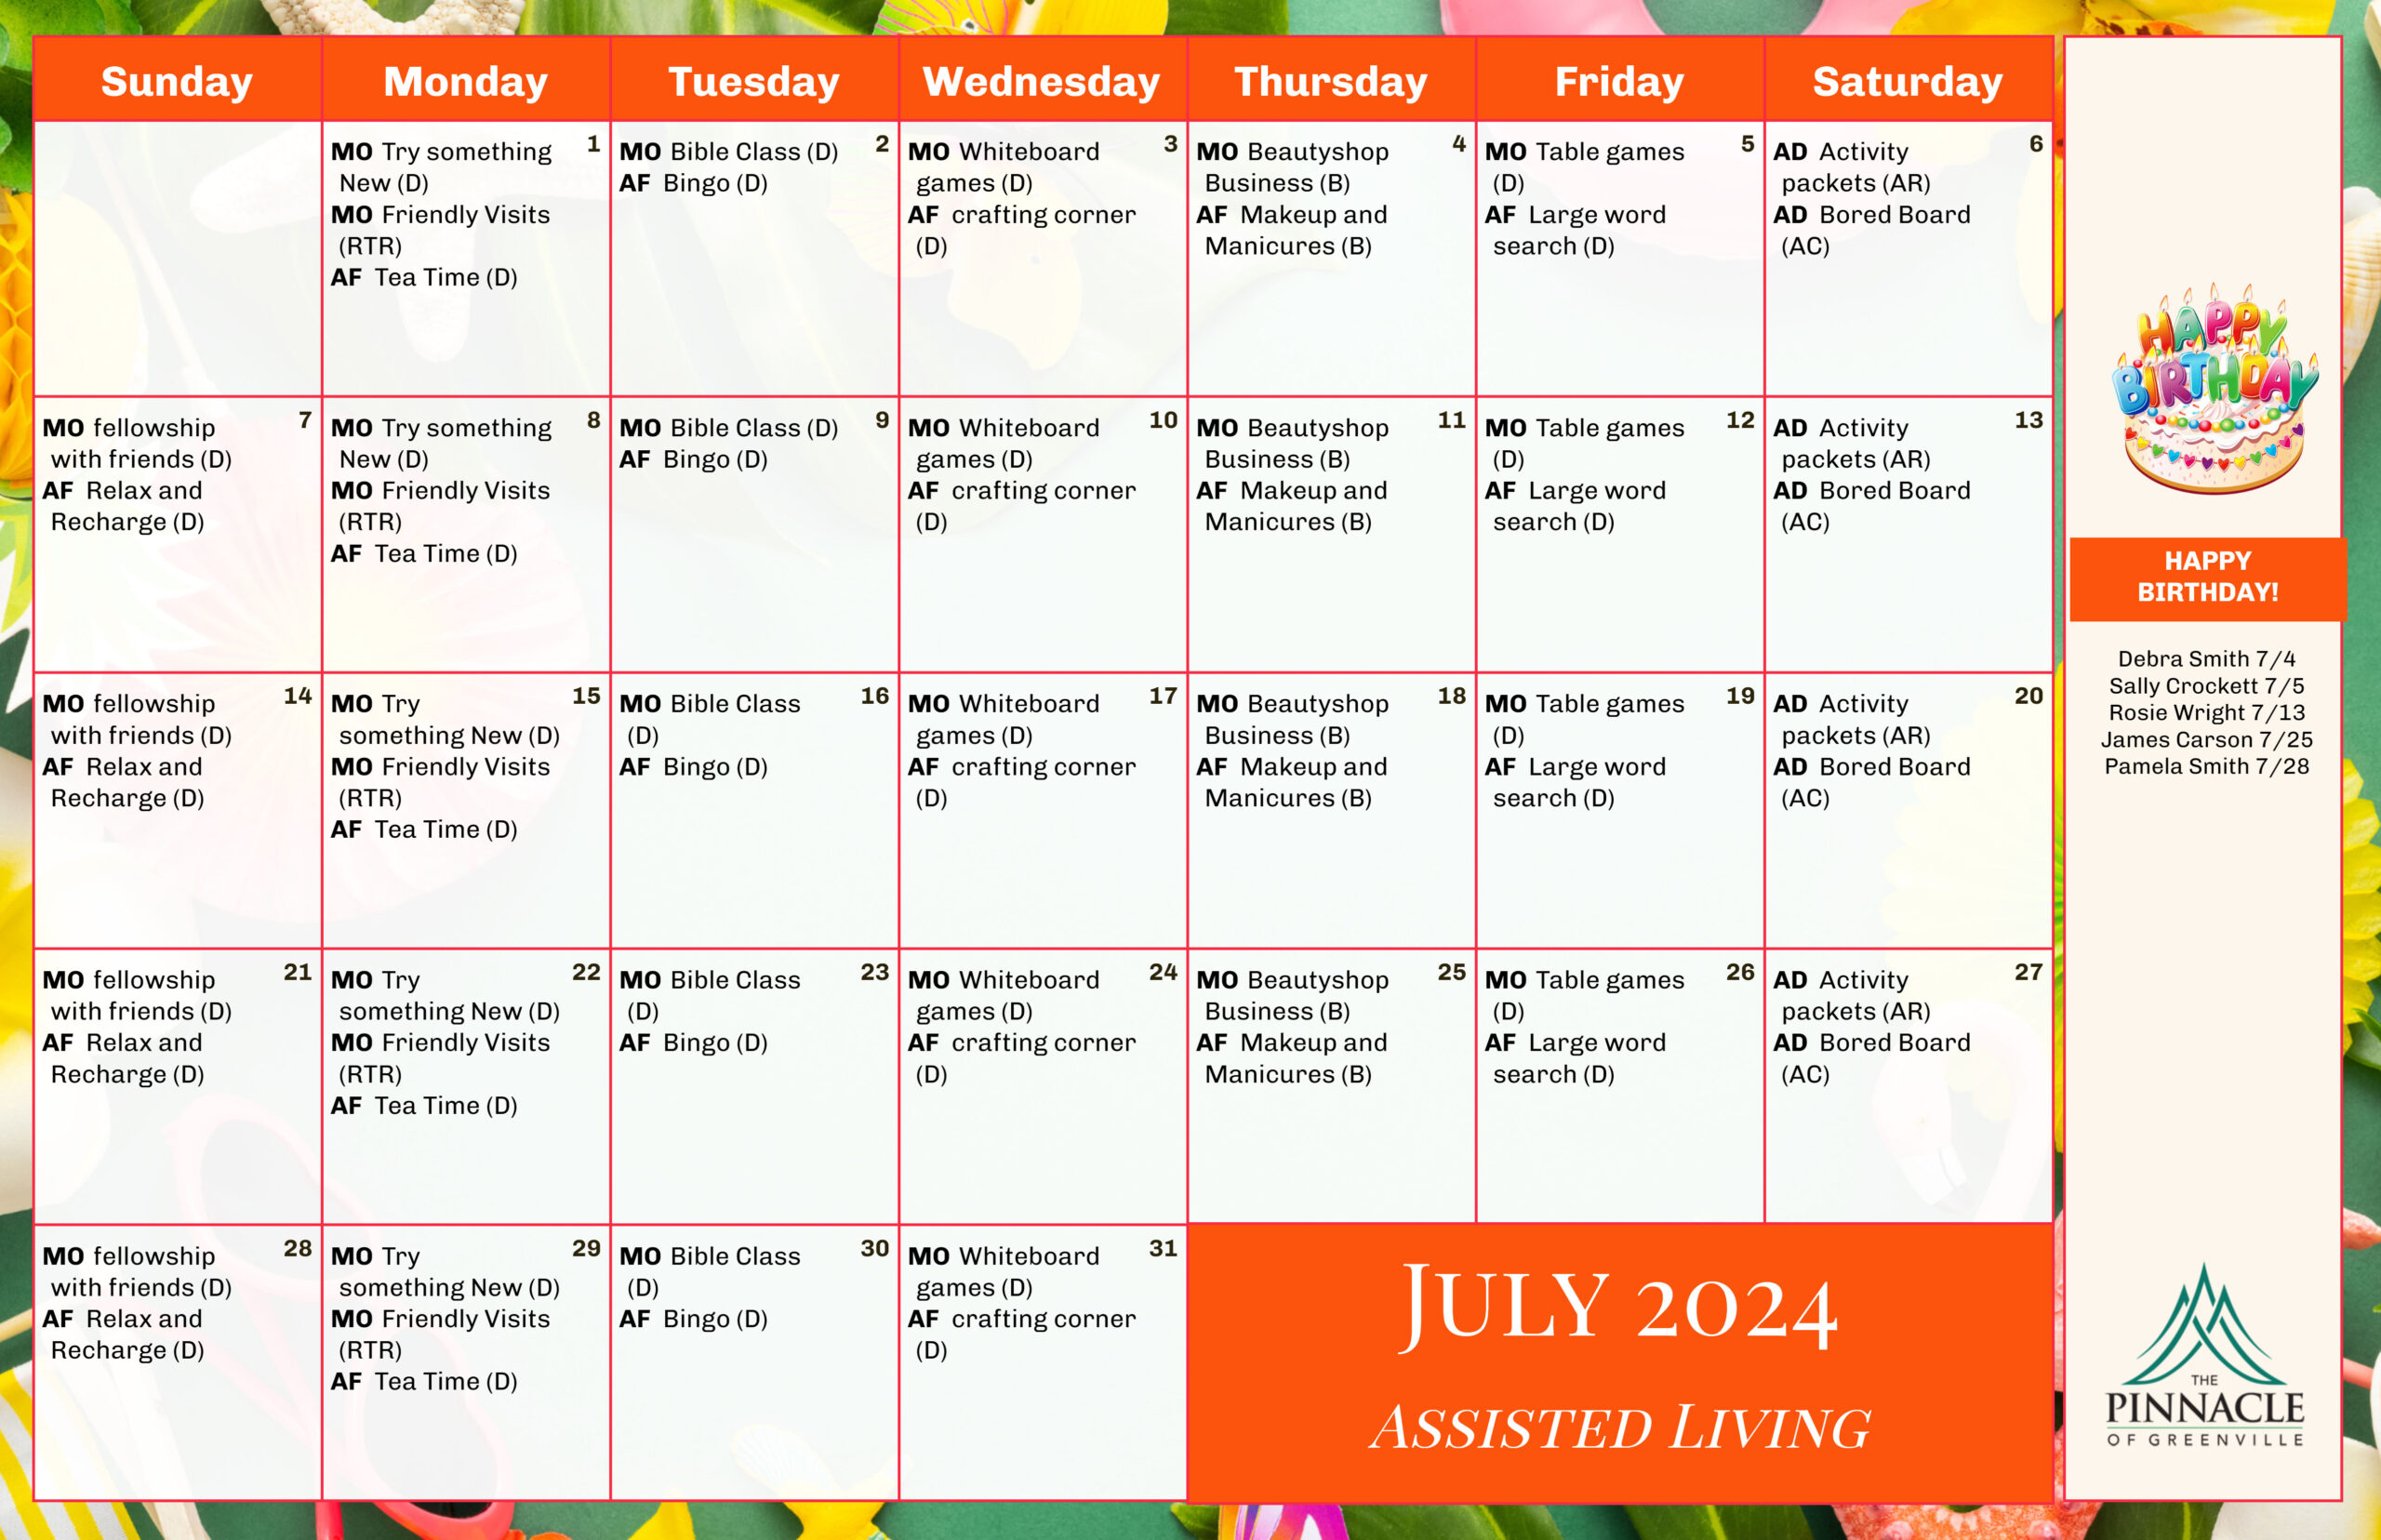 The Pinnacle of Greenville - Assisted Living and Memory Care - Assisted Living Calendar